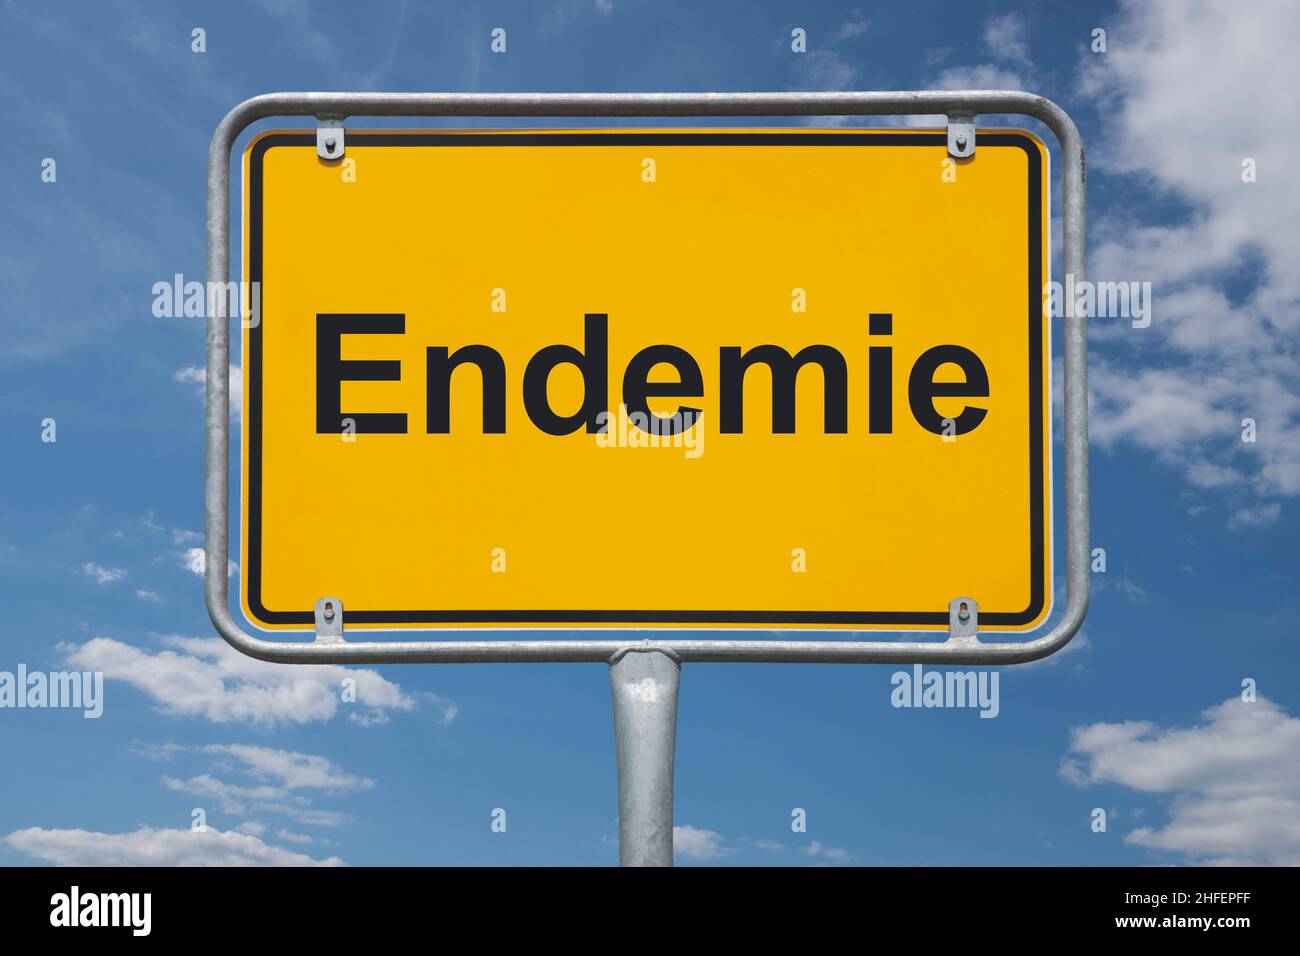 Inscription Endemic (epidemiology) on a traffic sign, place-name sign Germany, beginning of the town Stock Photo